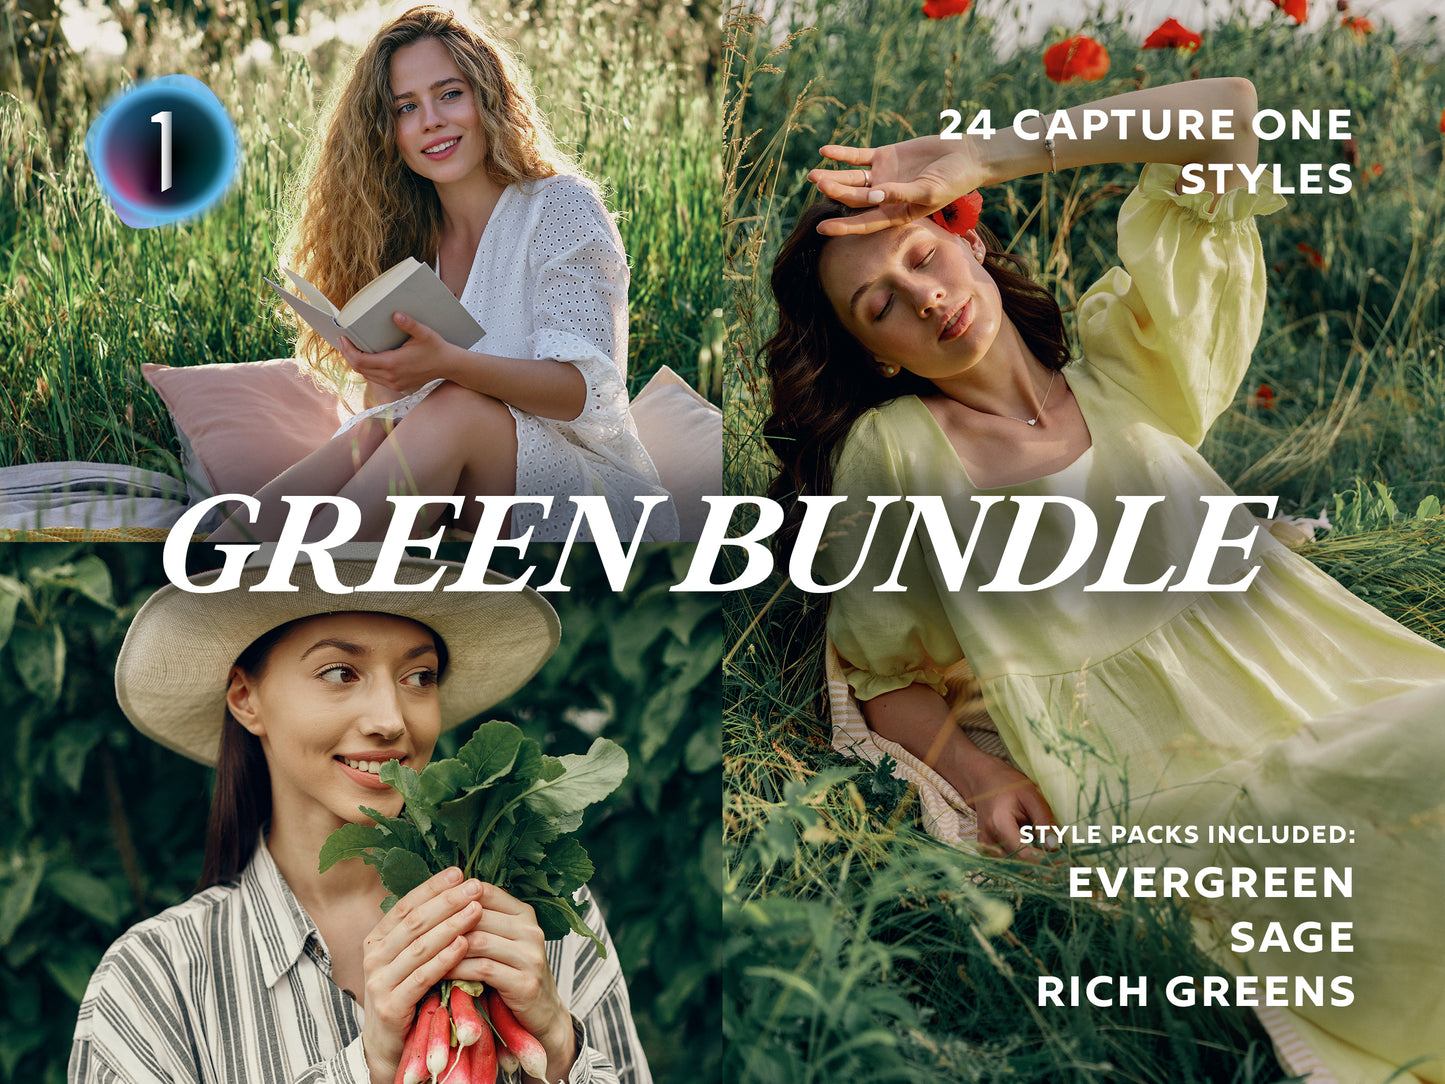 Green Bundle Capture One Styles